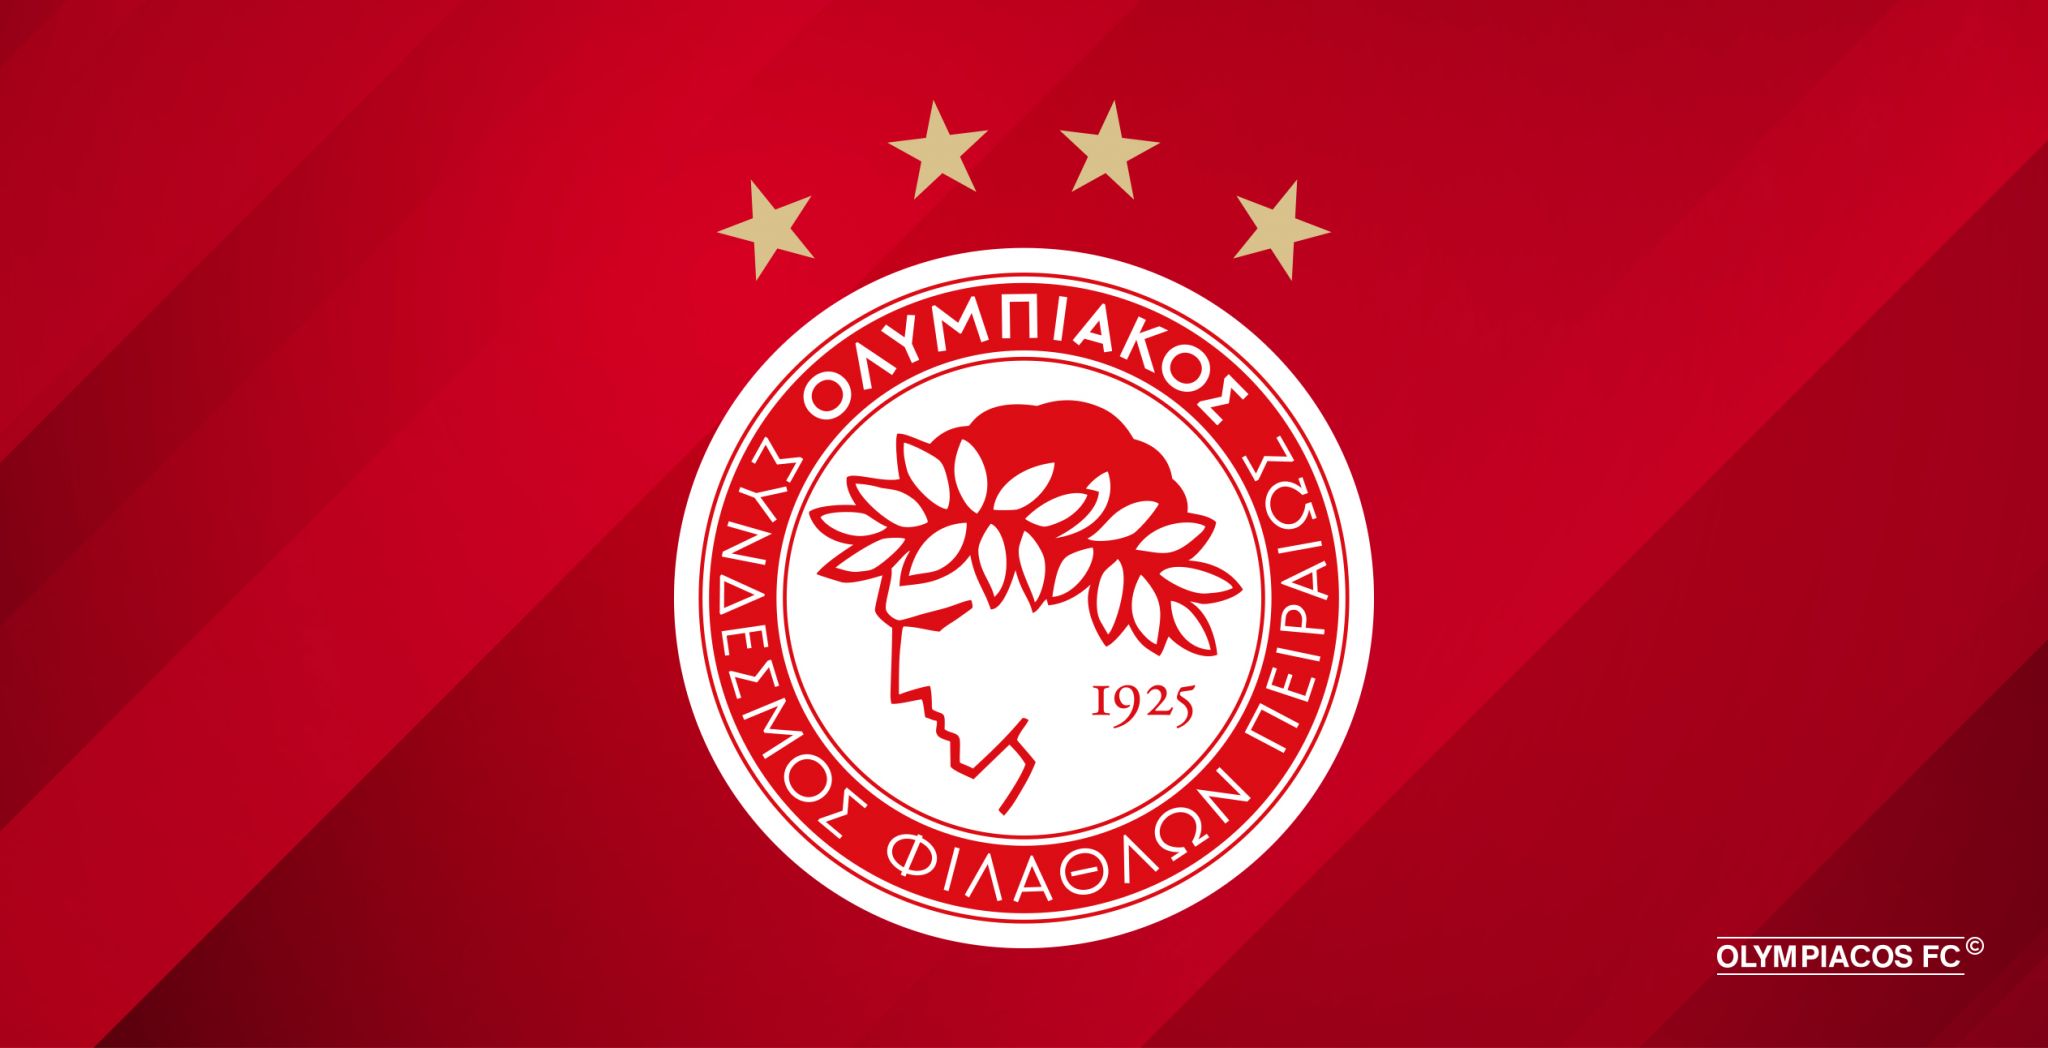 Press release by Olympiacos FC